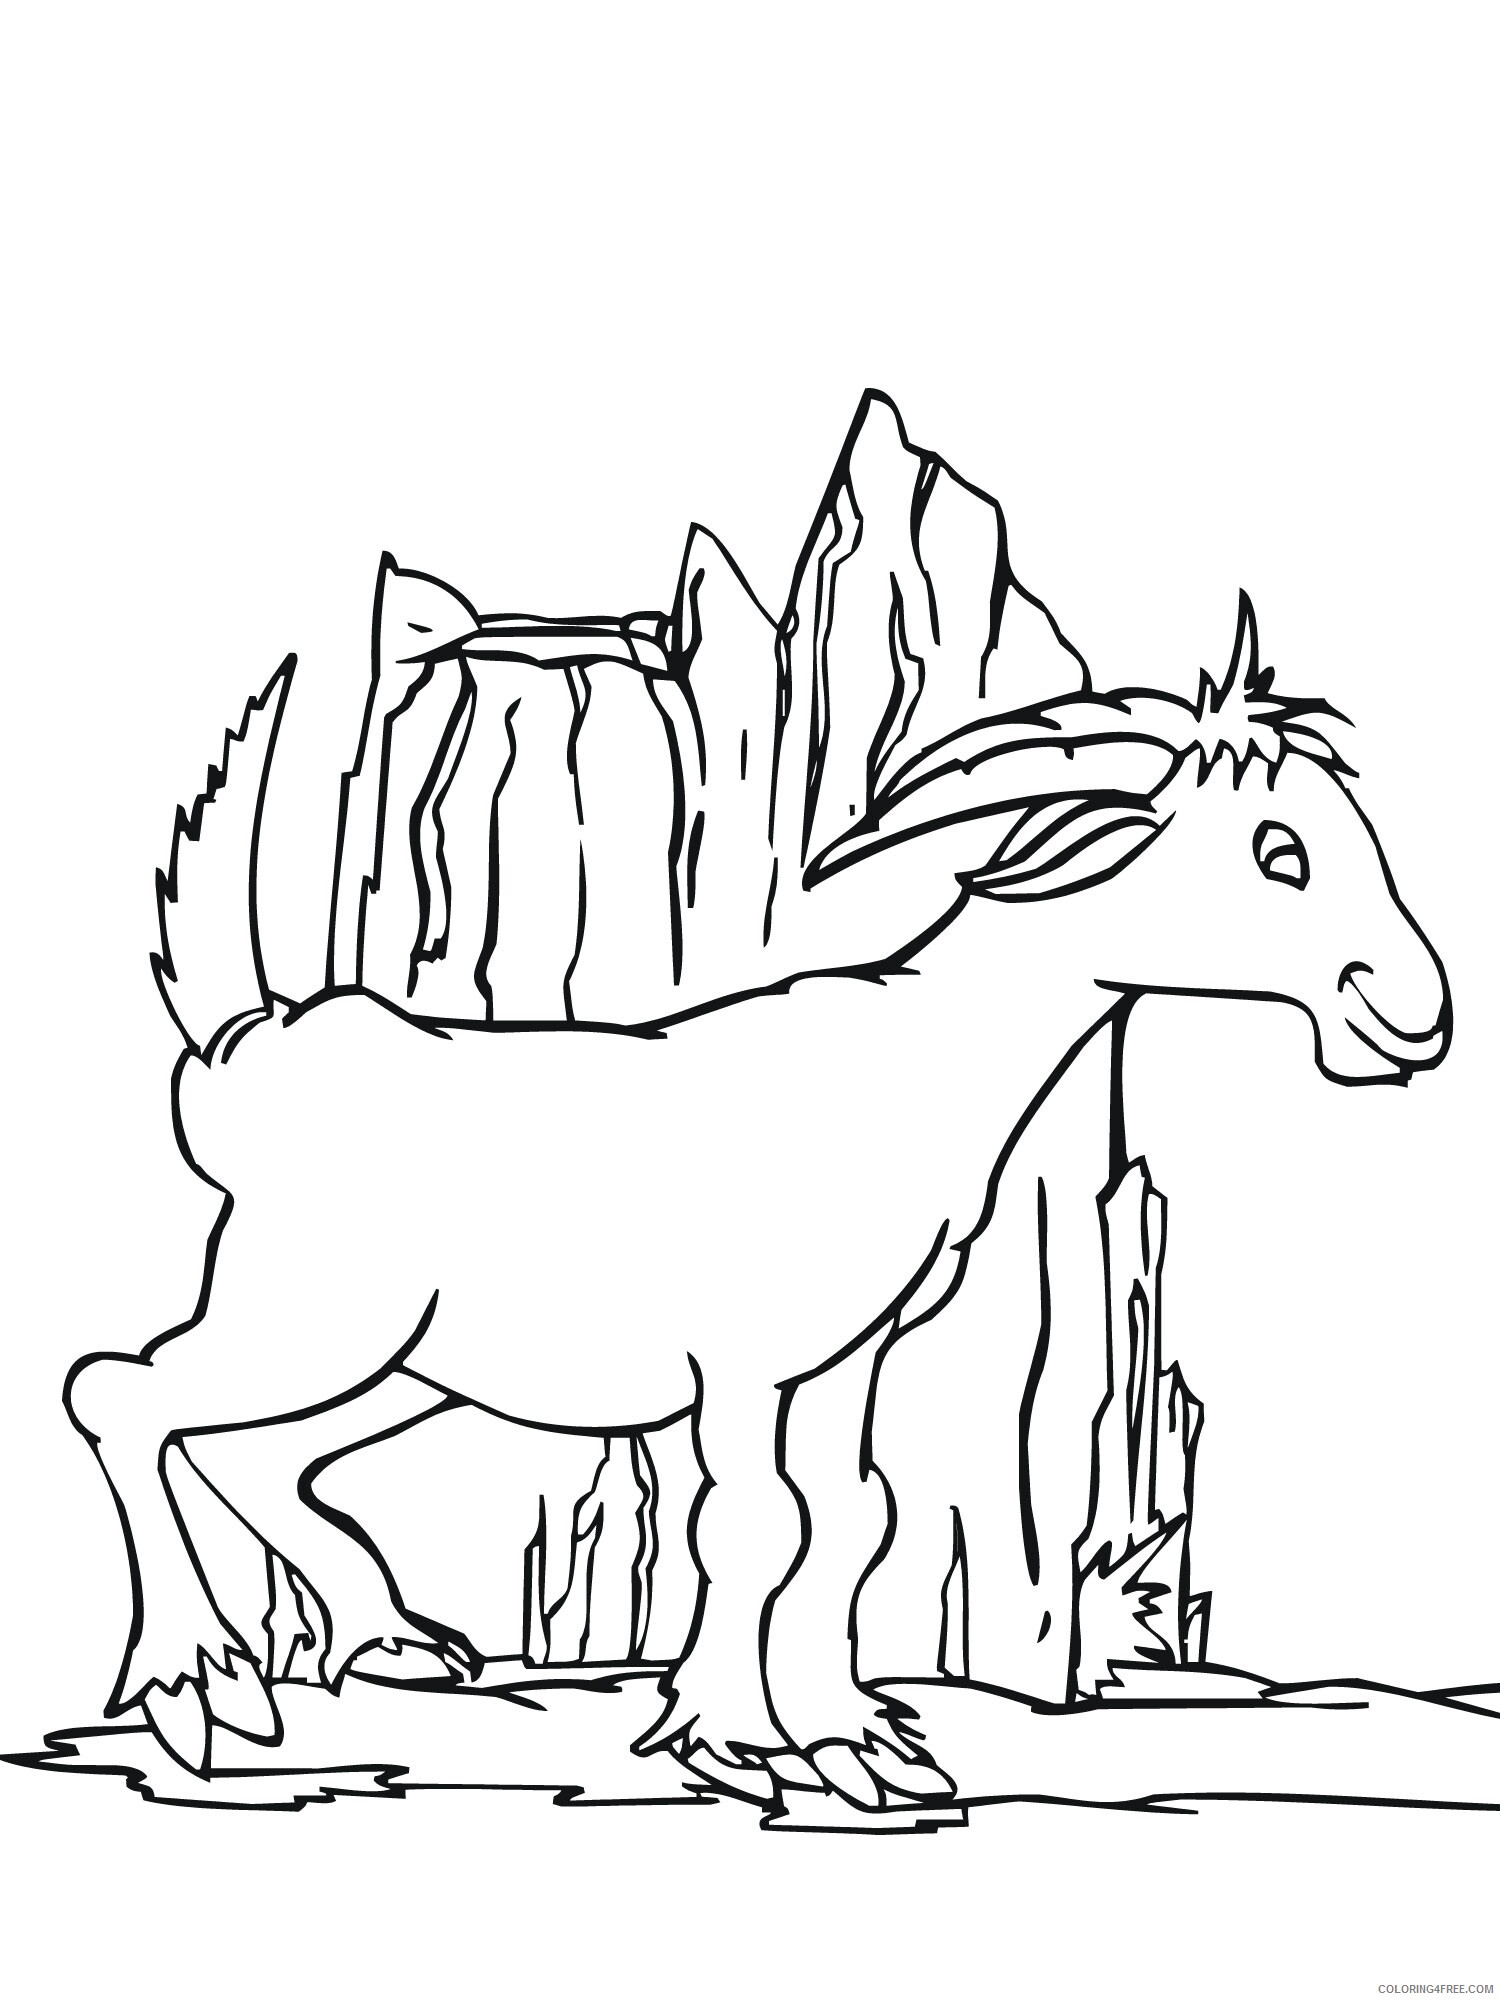 Goat Coloring Pages Animal Printable Sheets of Goat 2021 2445 Coloring4free